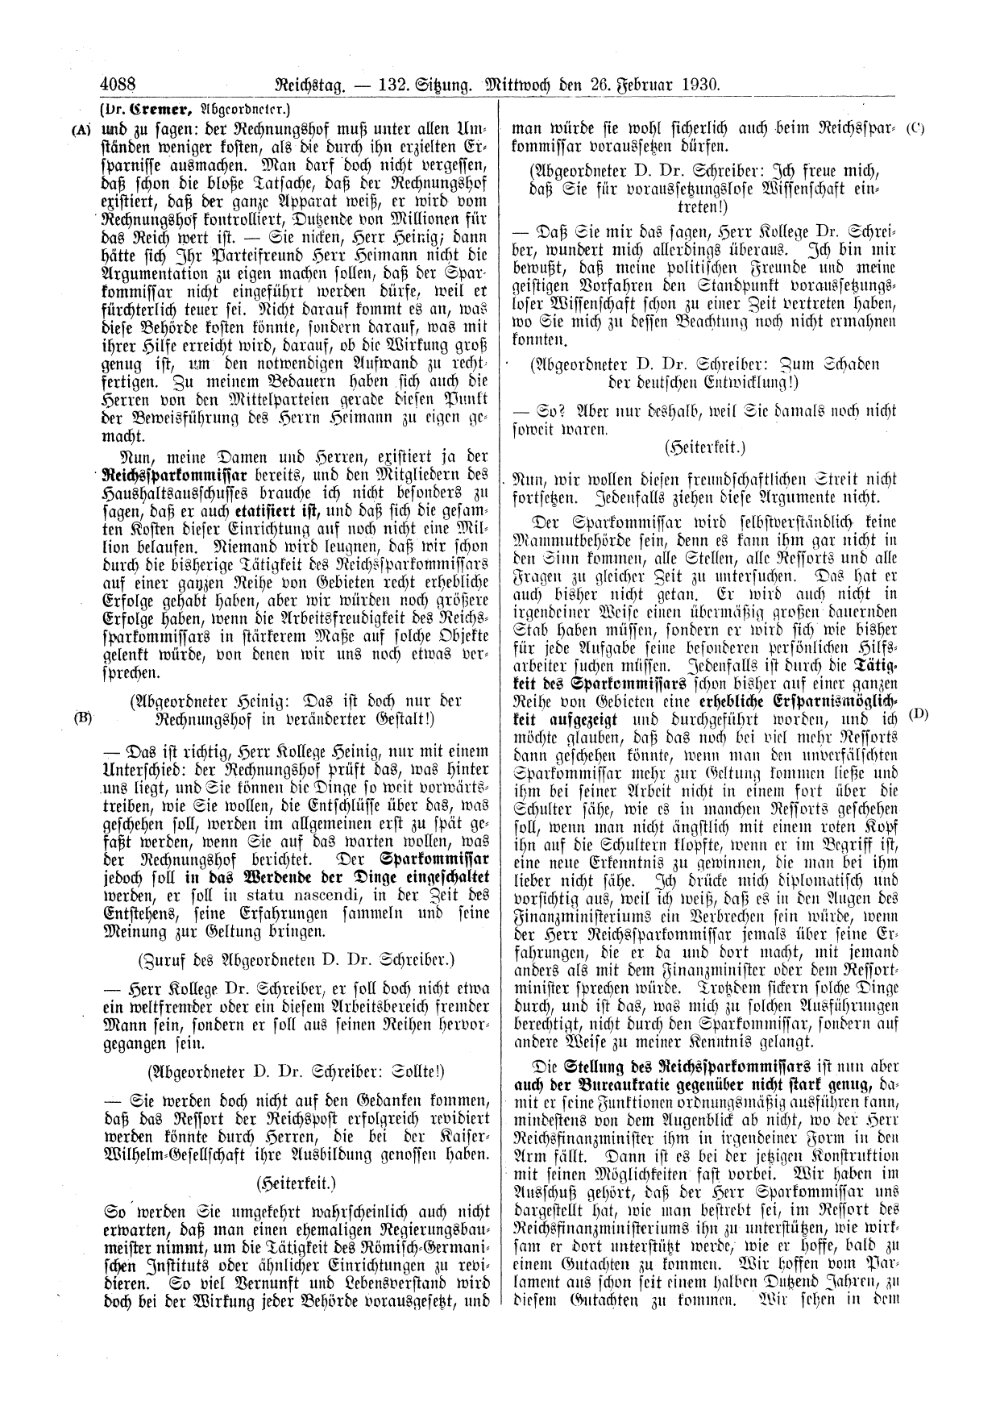 Scan of page 4088